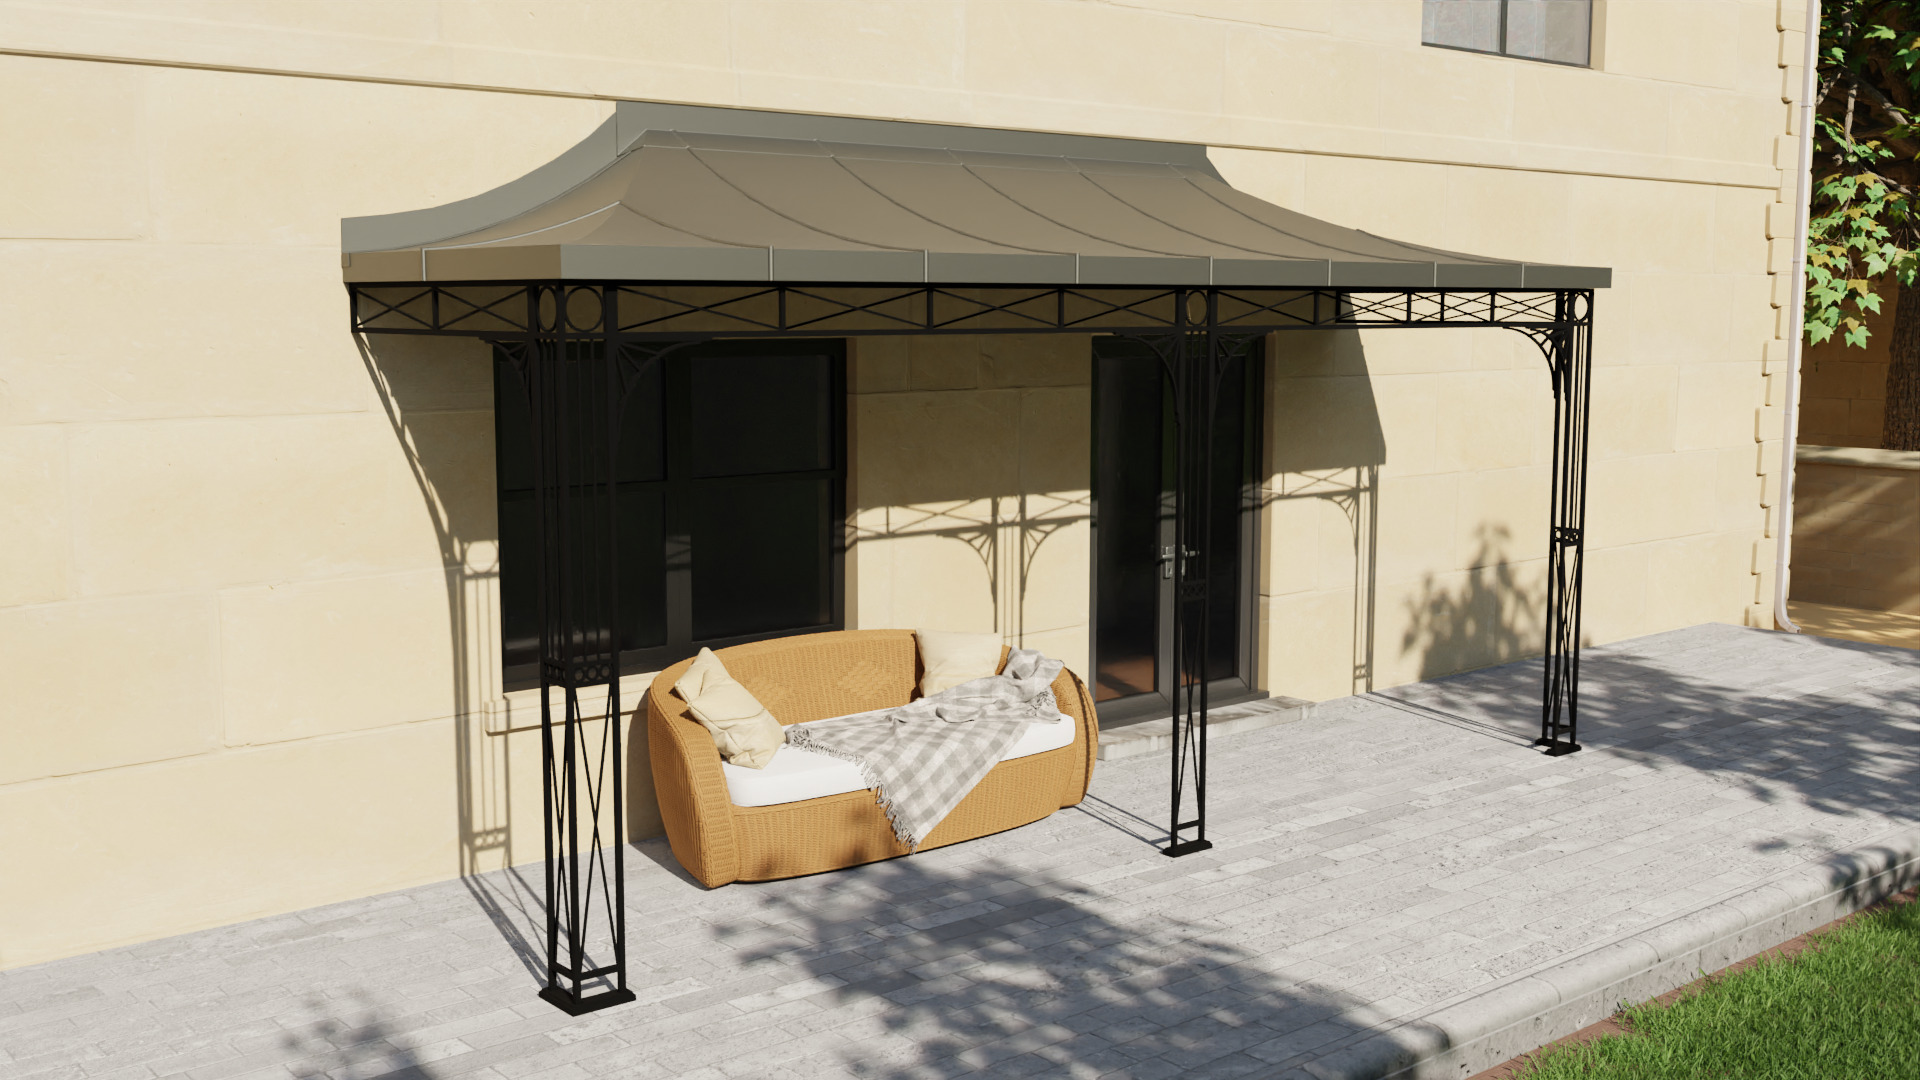 A 3D side view of our wentworth ironwork in a small garden veranda configuration